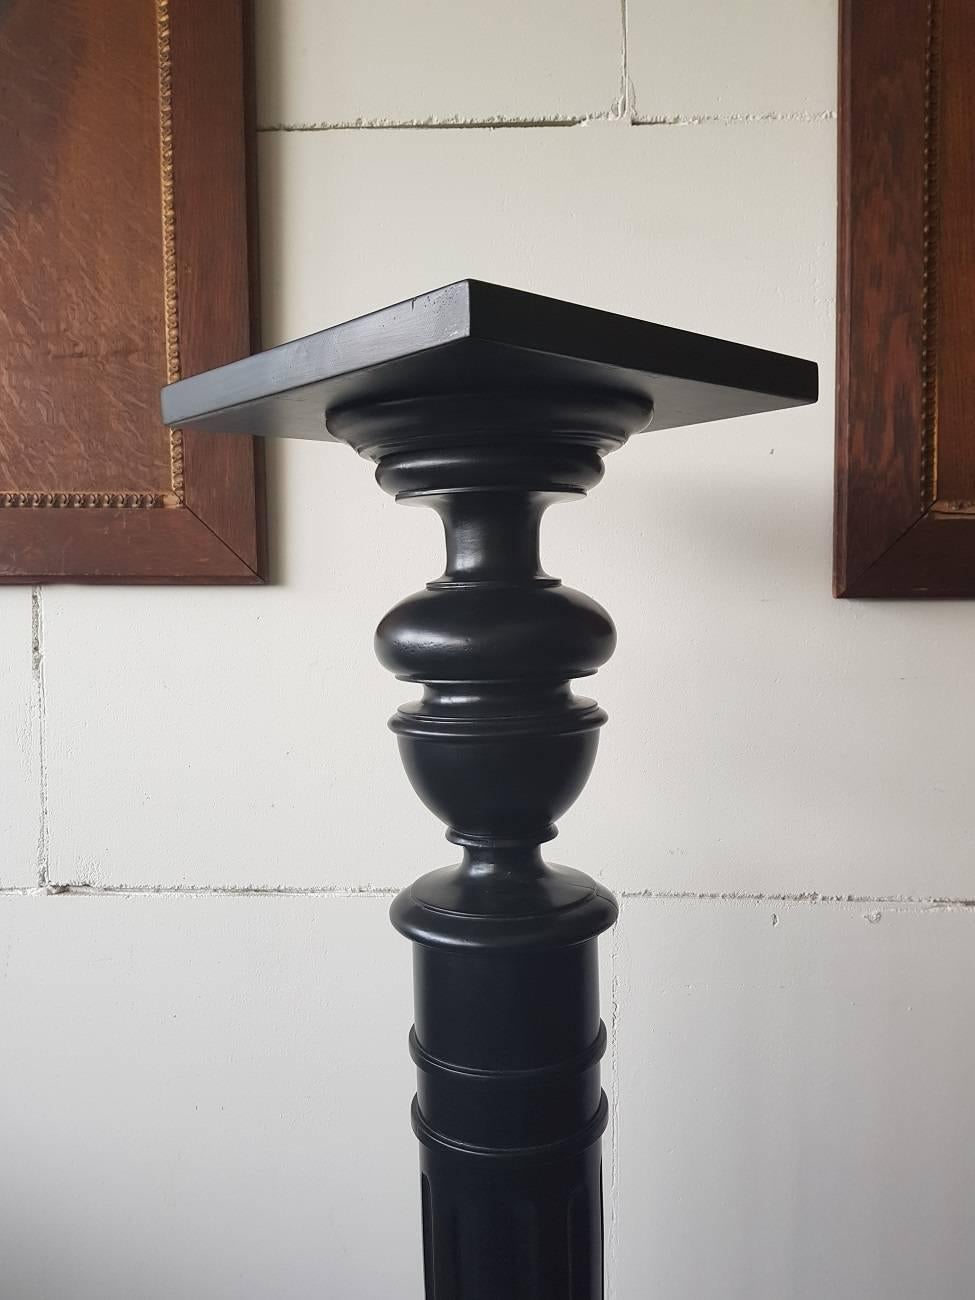 Neoclassical Late 19th Century Black Polished Pedestal/Column